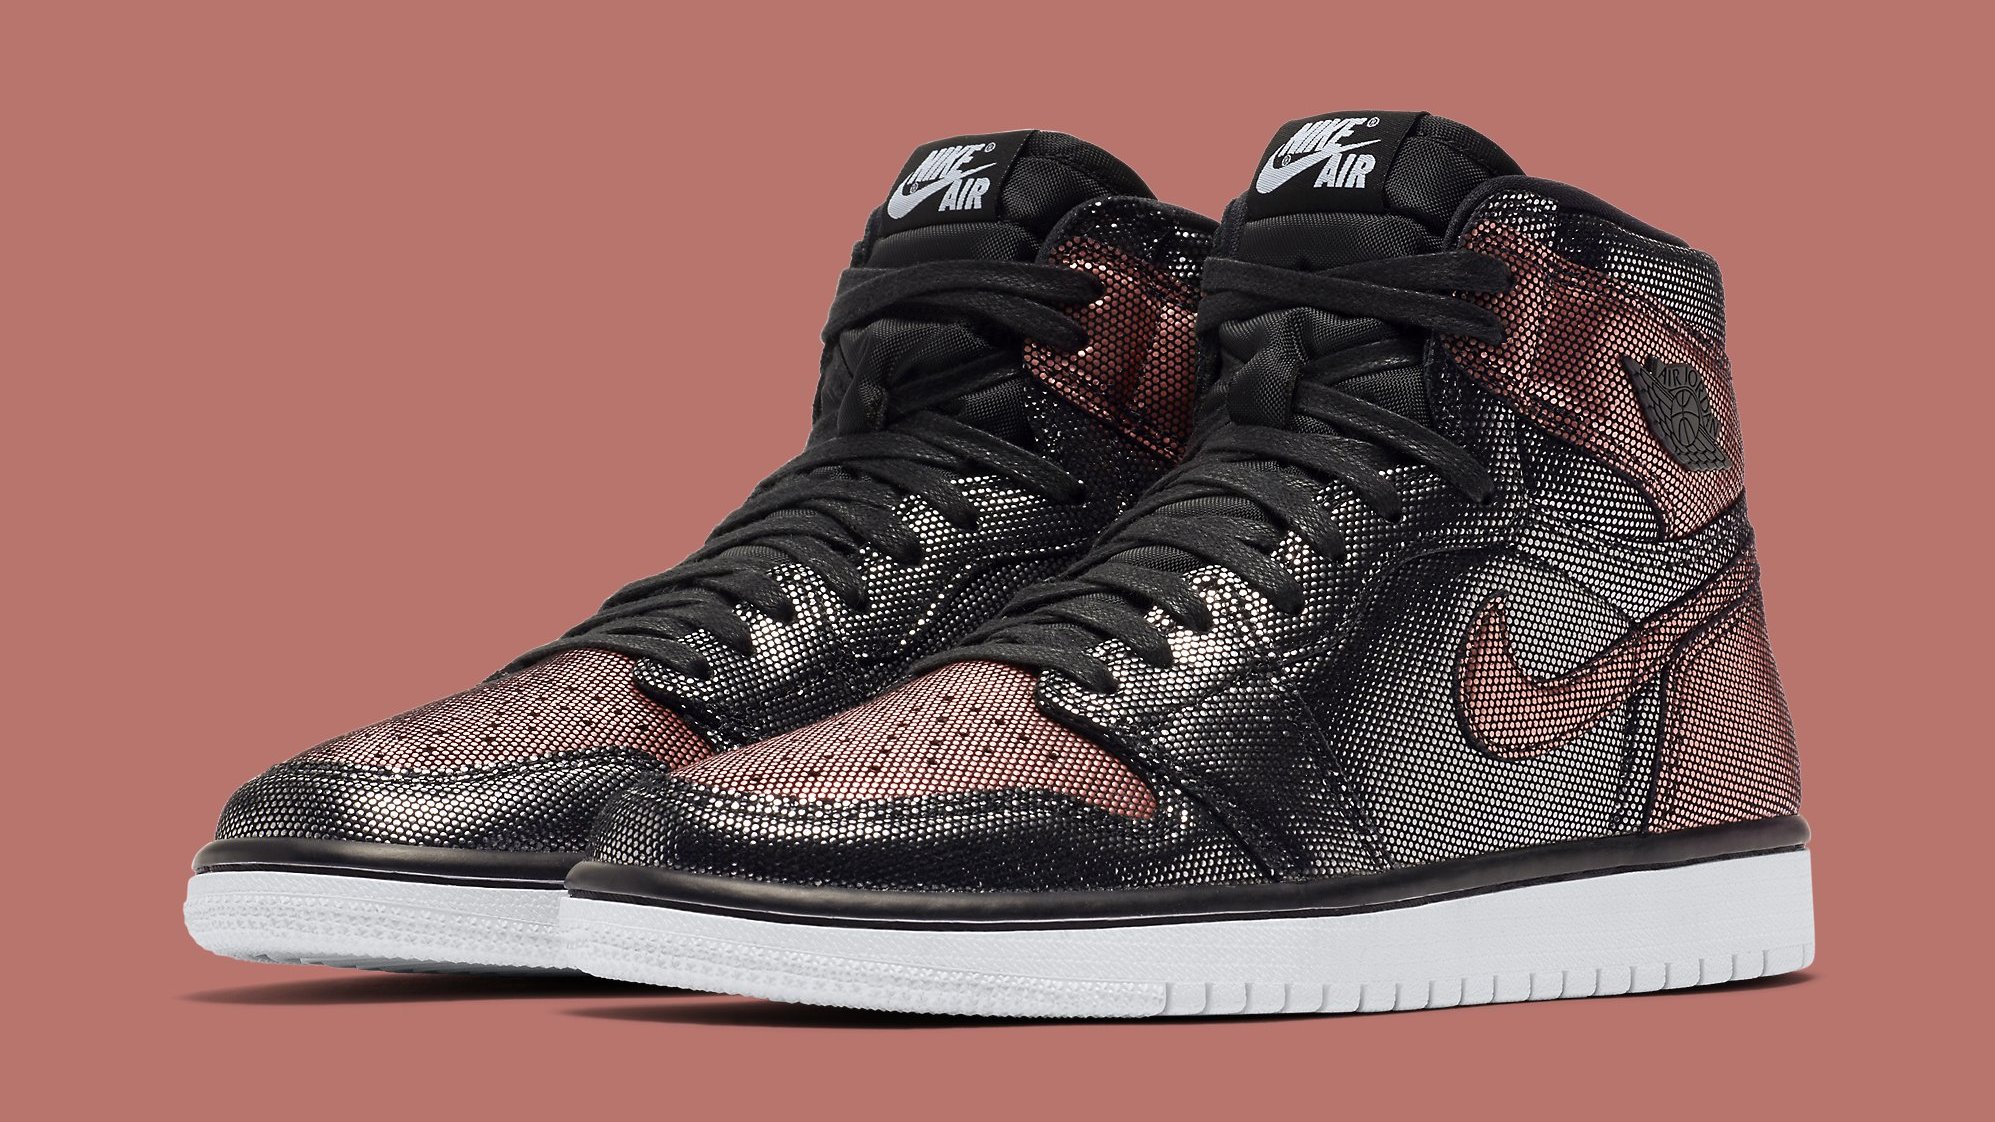 Women's Exclusive Air Jordan 1 'Fearless' Is Dropping Next